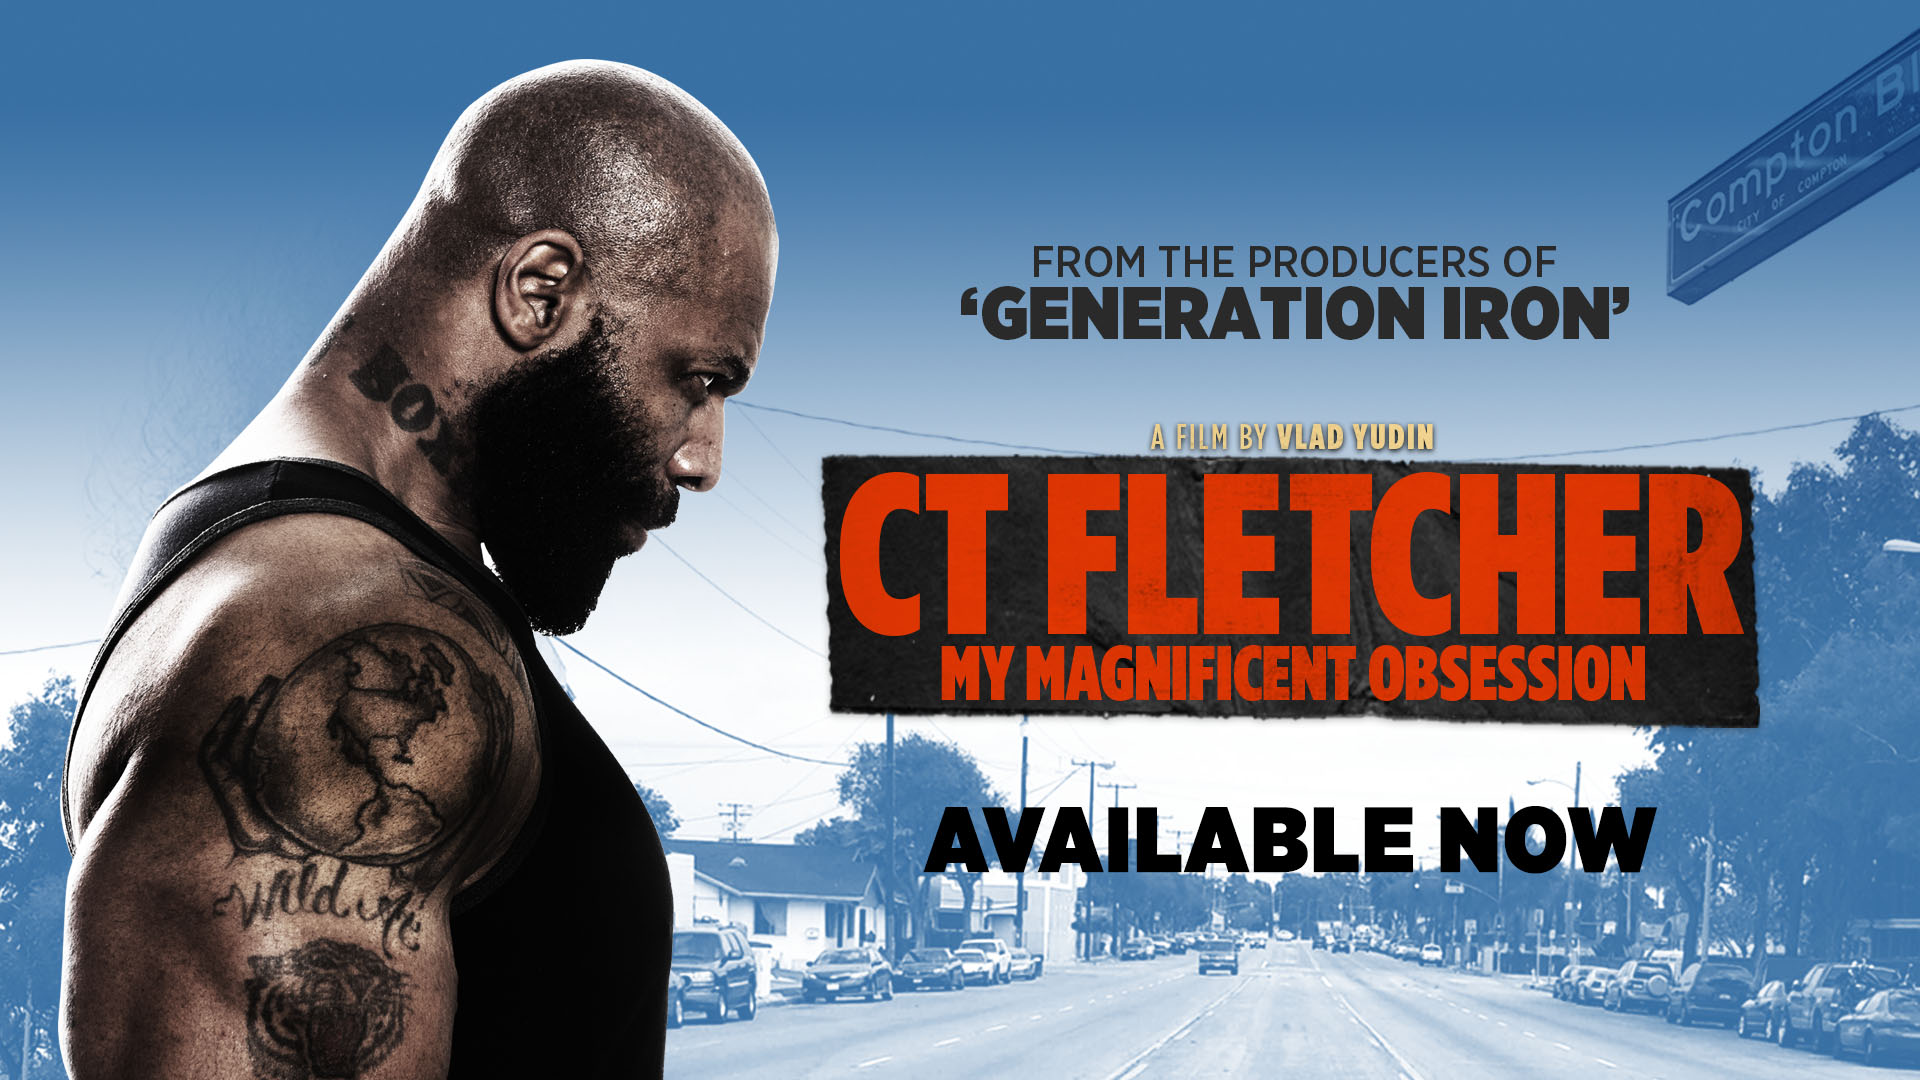 Generation Iron CT Fletcher Movie Available Now